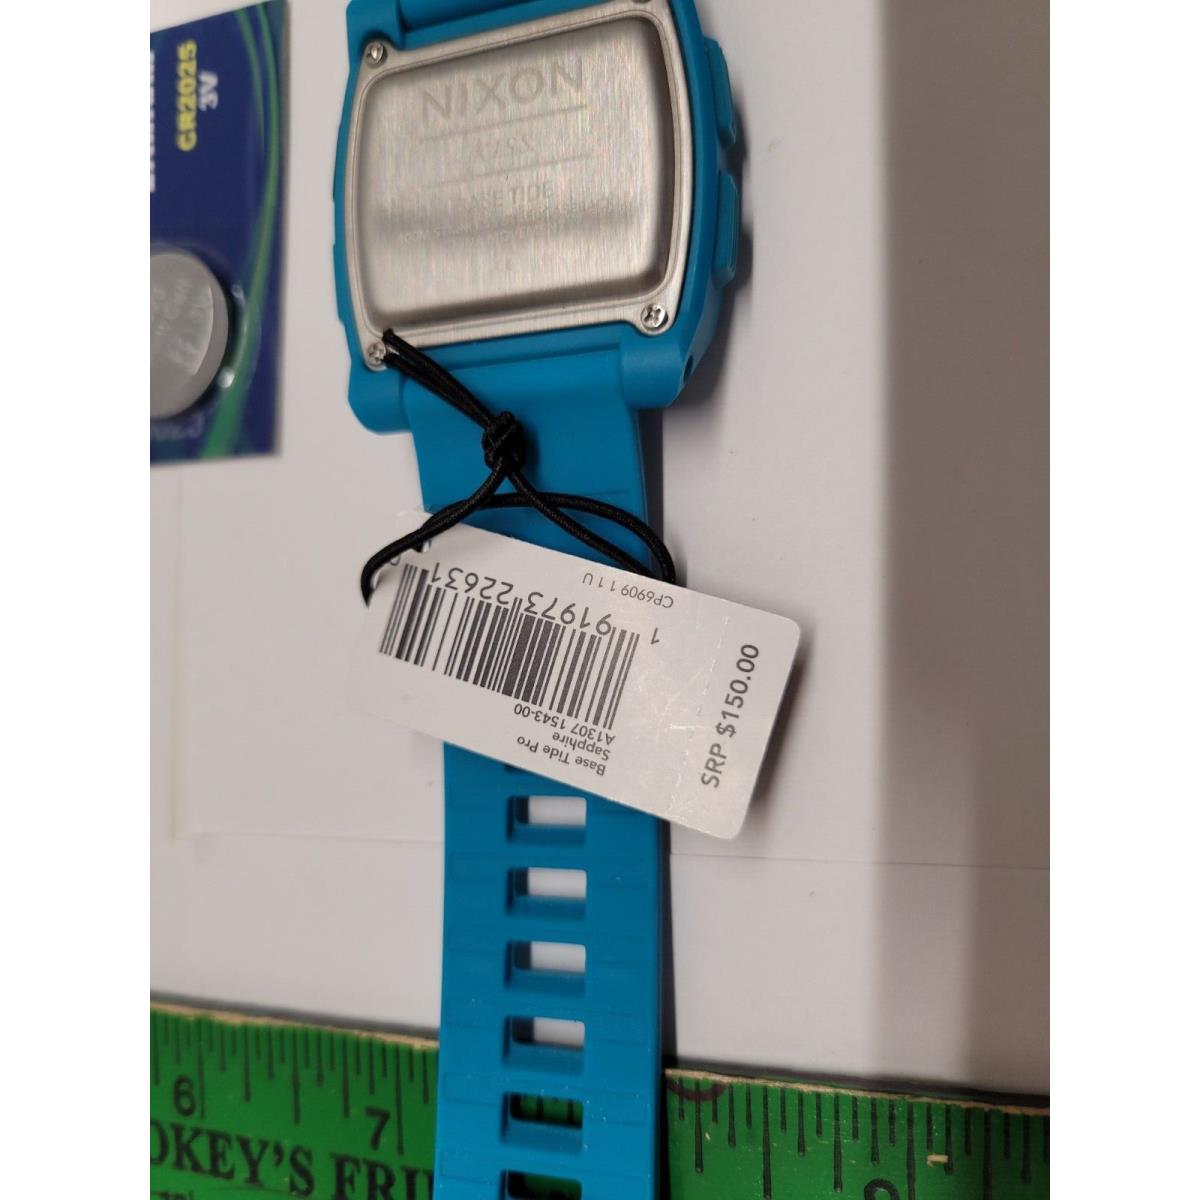 Nixon Base Tide Pro A1307 Digital Watch For Men and Women - Battery Spares